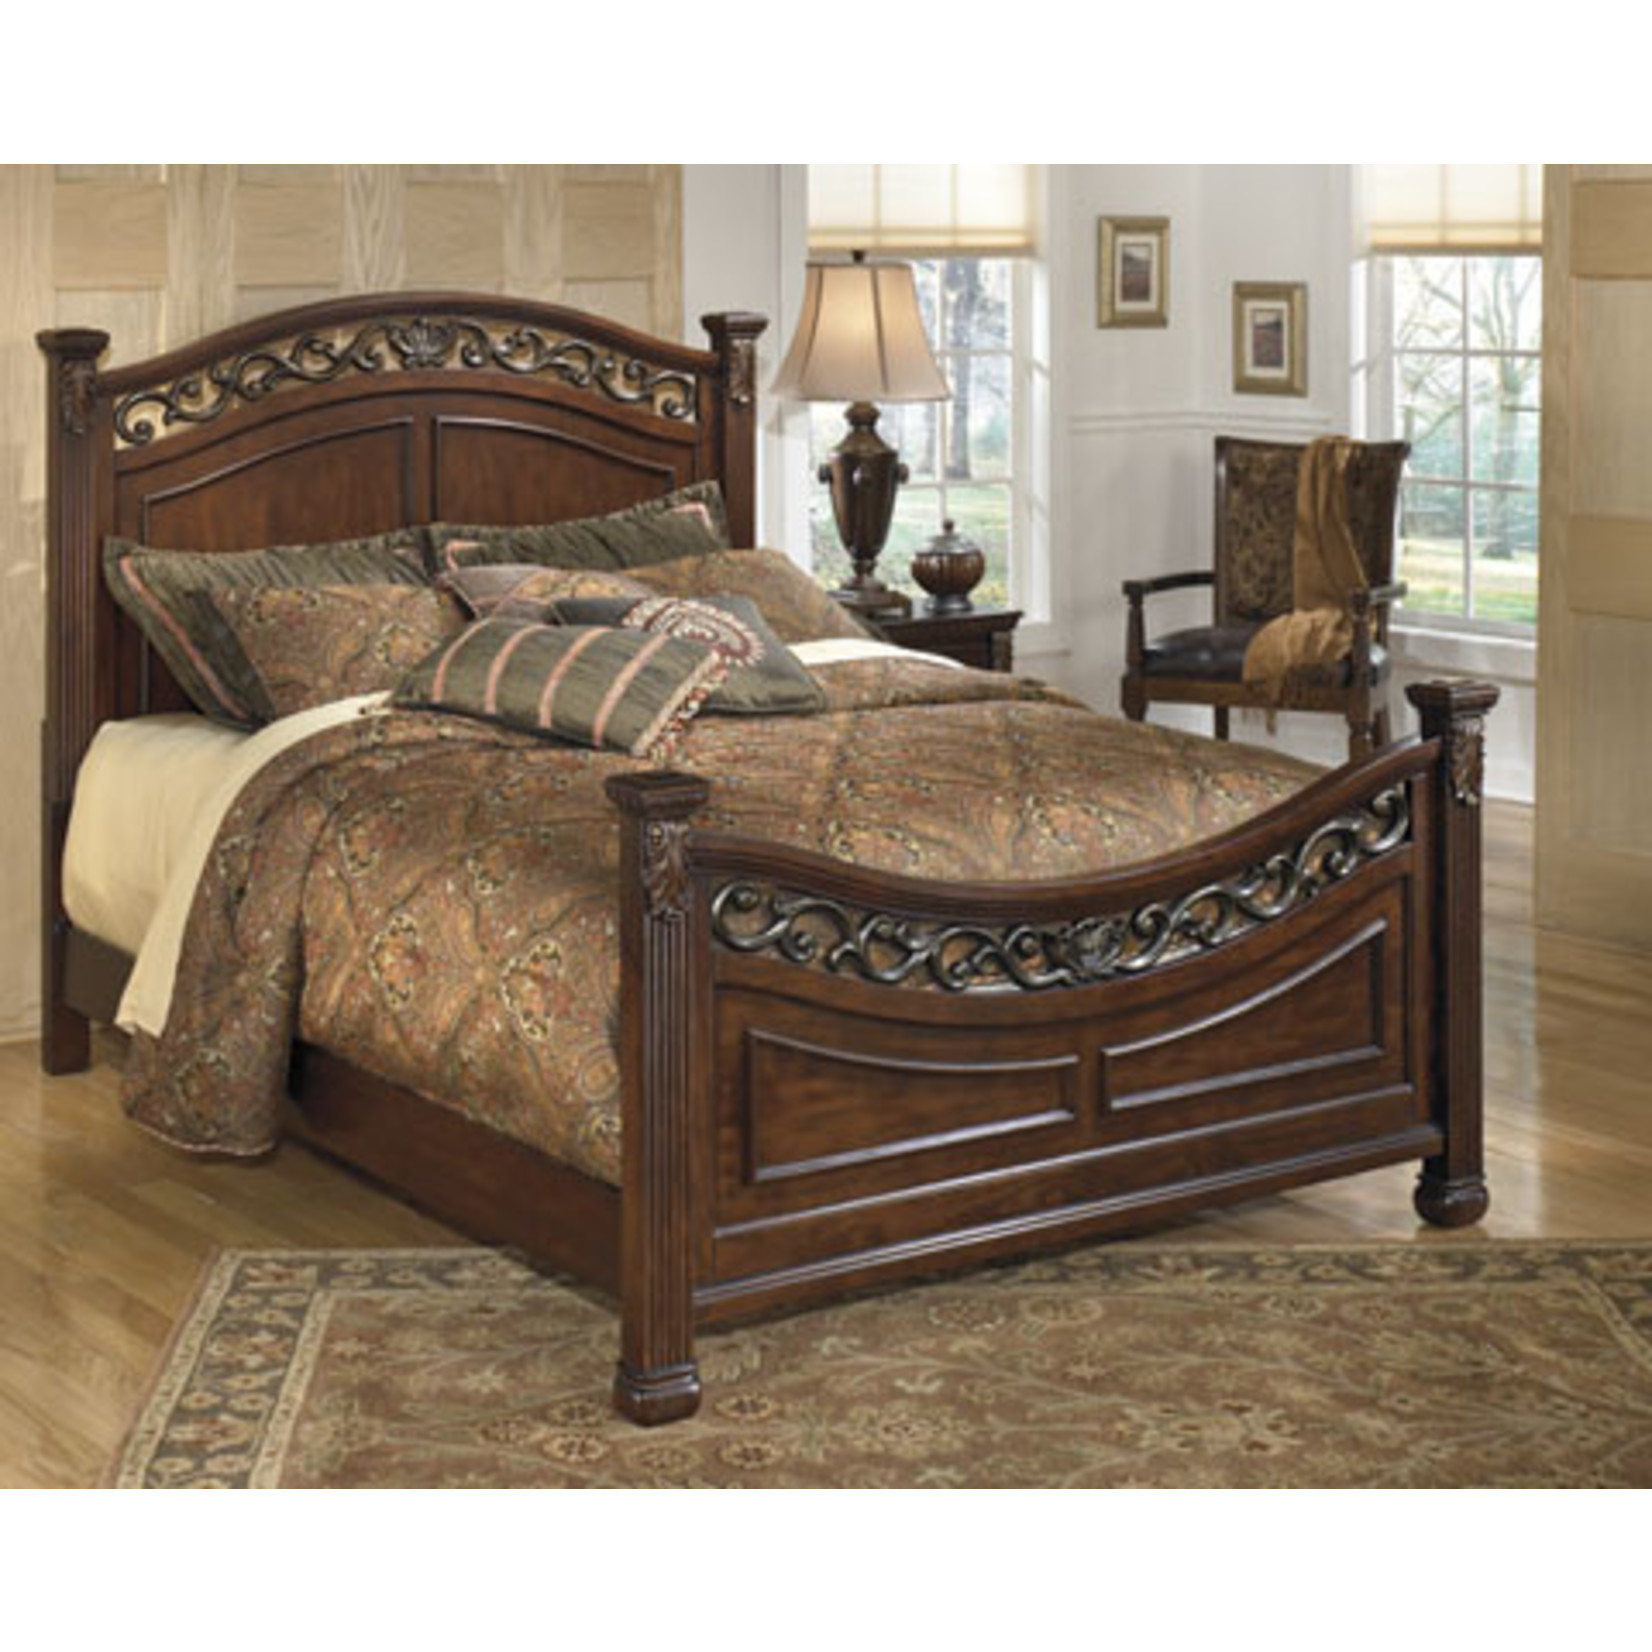 ASHLEY FURNITURE LEAHLYN  BROWN QUEEN BED BY ASHLEY